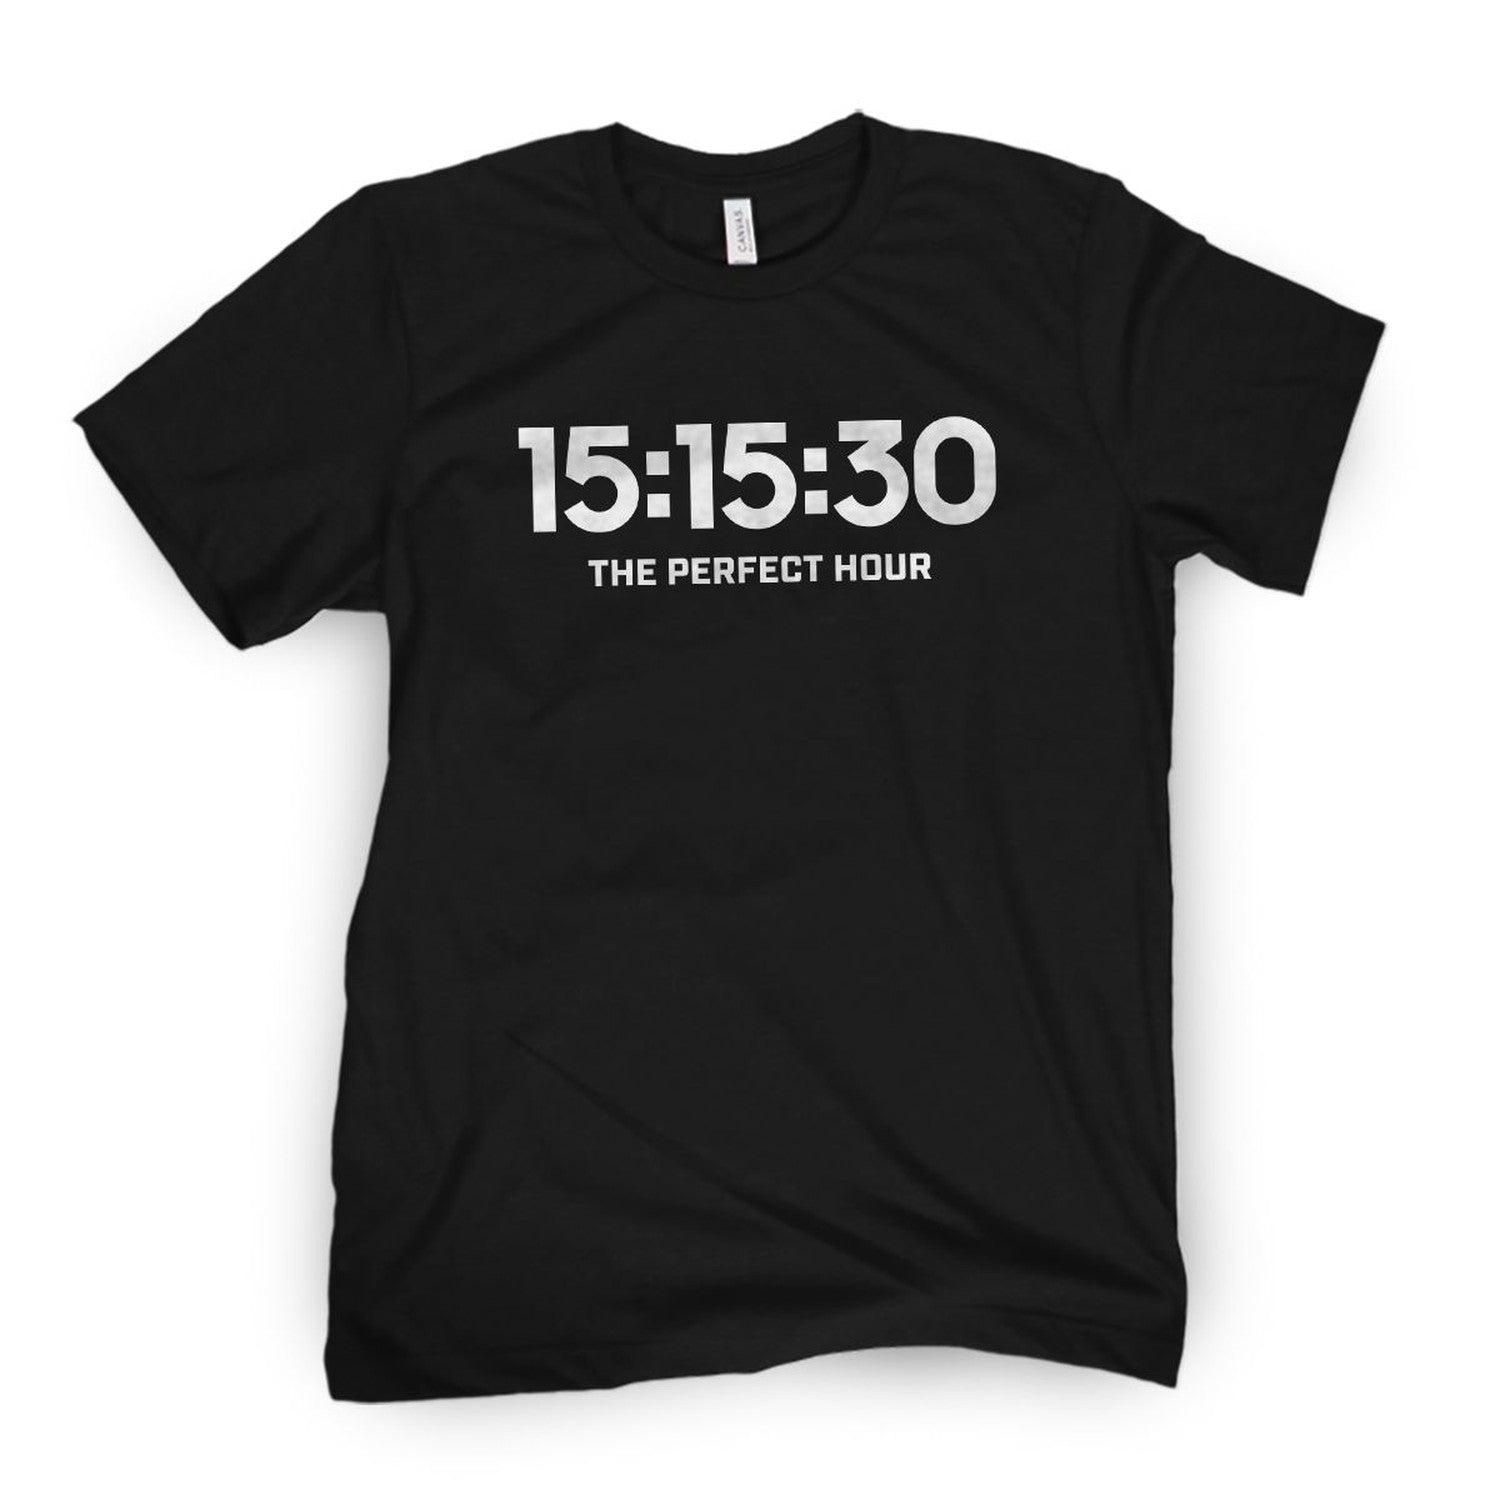 The Perfect Hour Tee